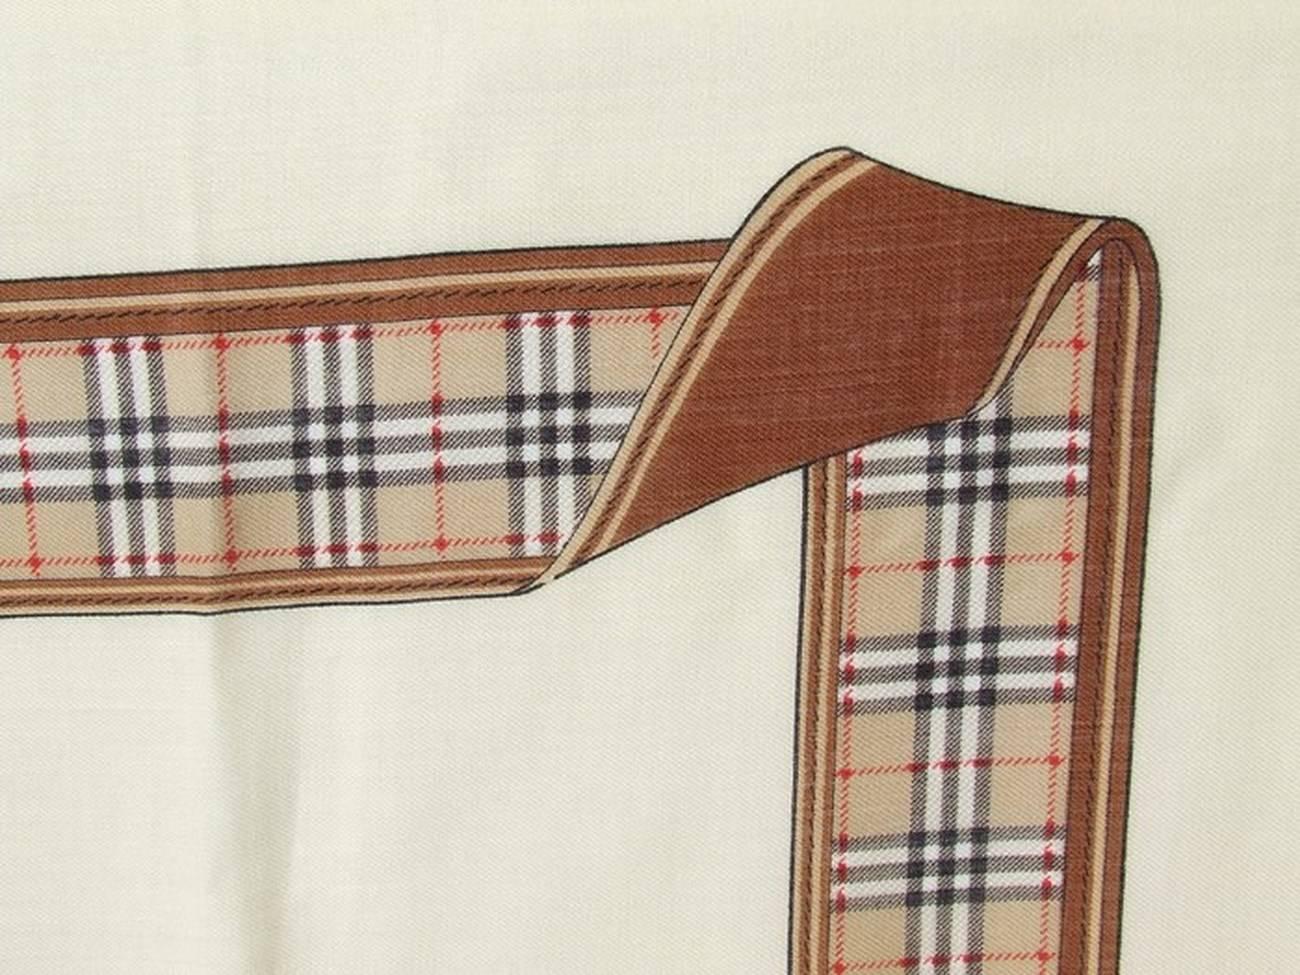 Authentic Burberry Shawl Scarf Ivory Check Pattern Wool 55 inches 2